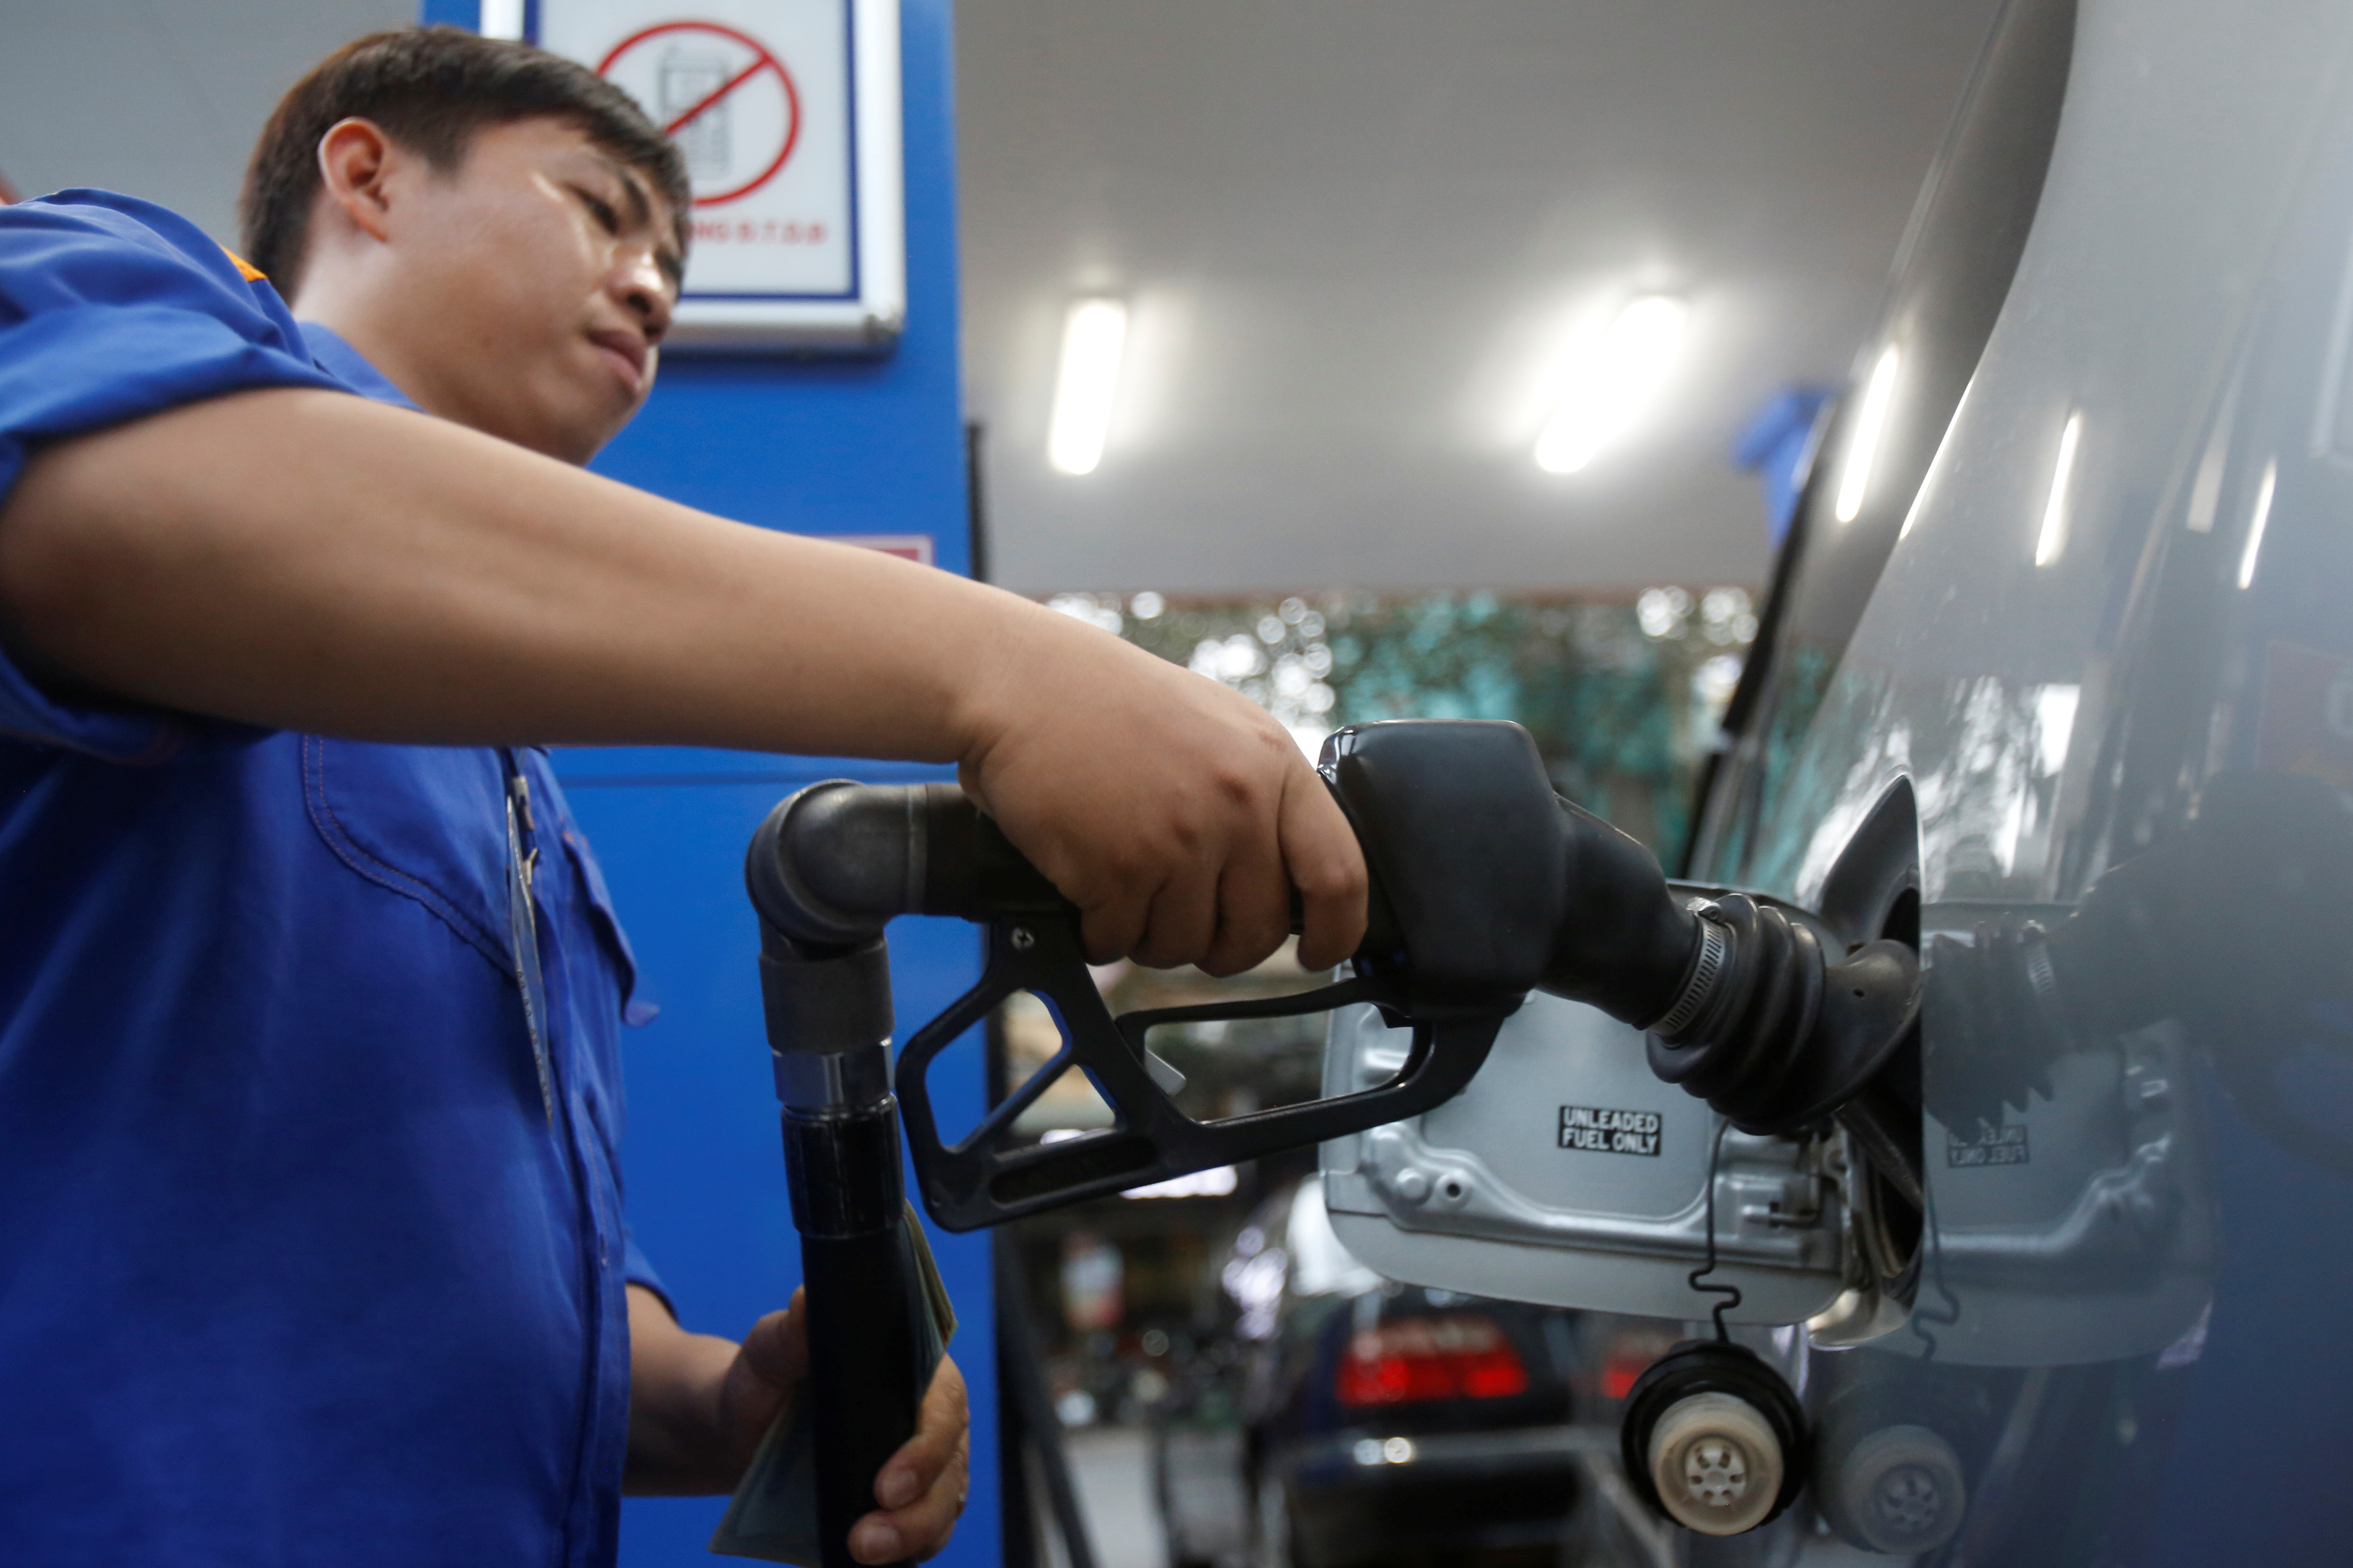 An employee pumps petrol into a car at a petrol station in Hanoi